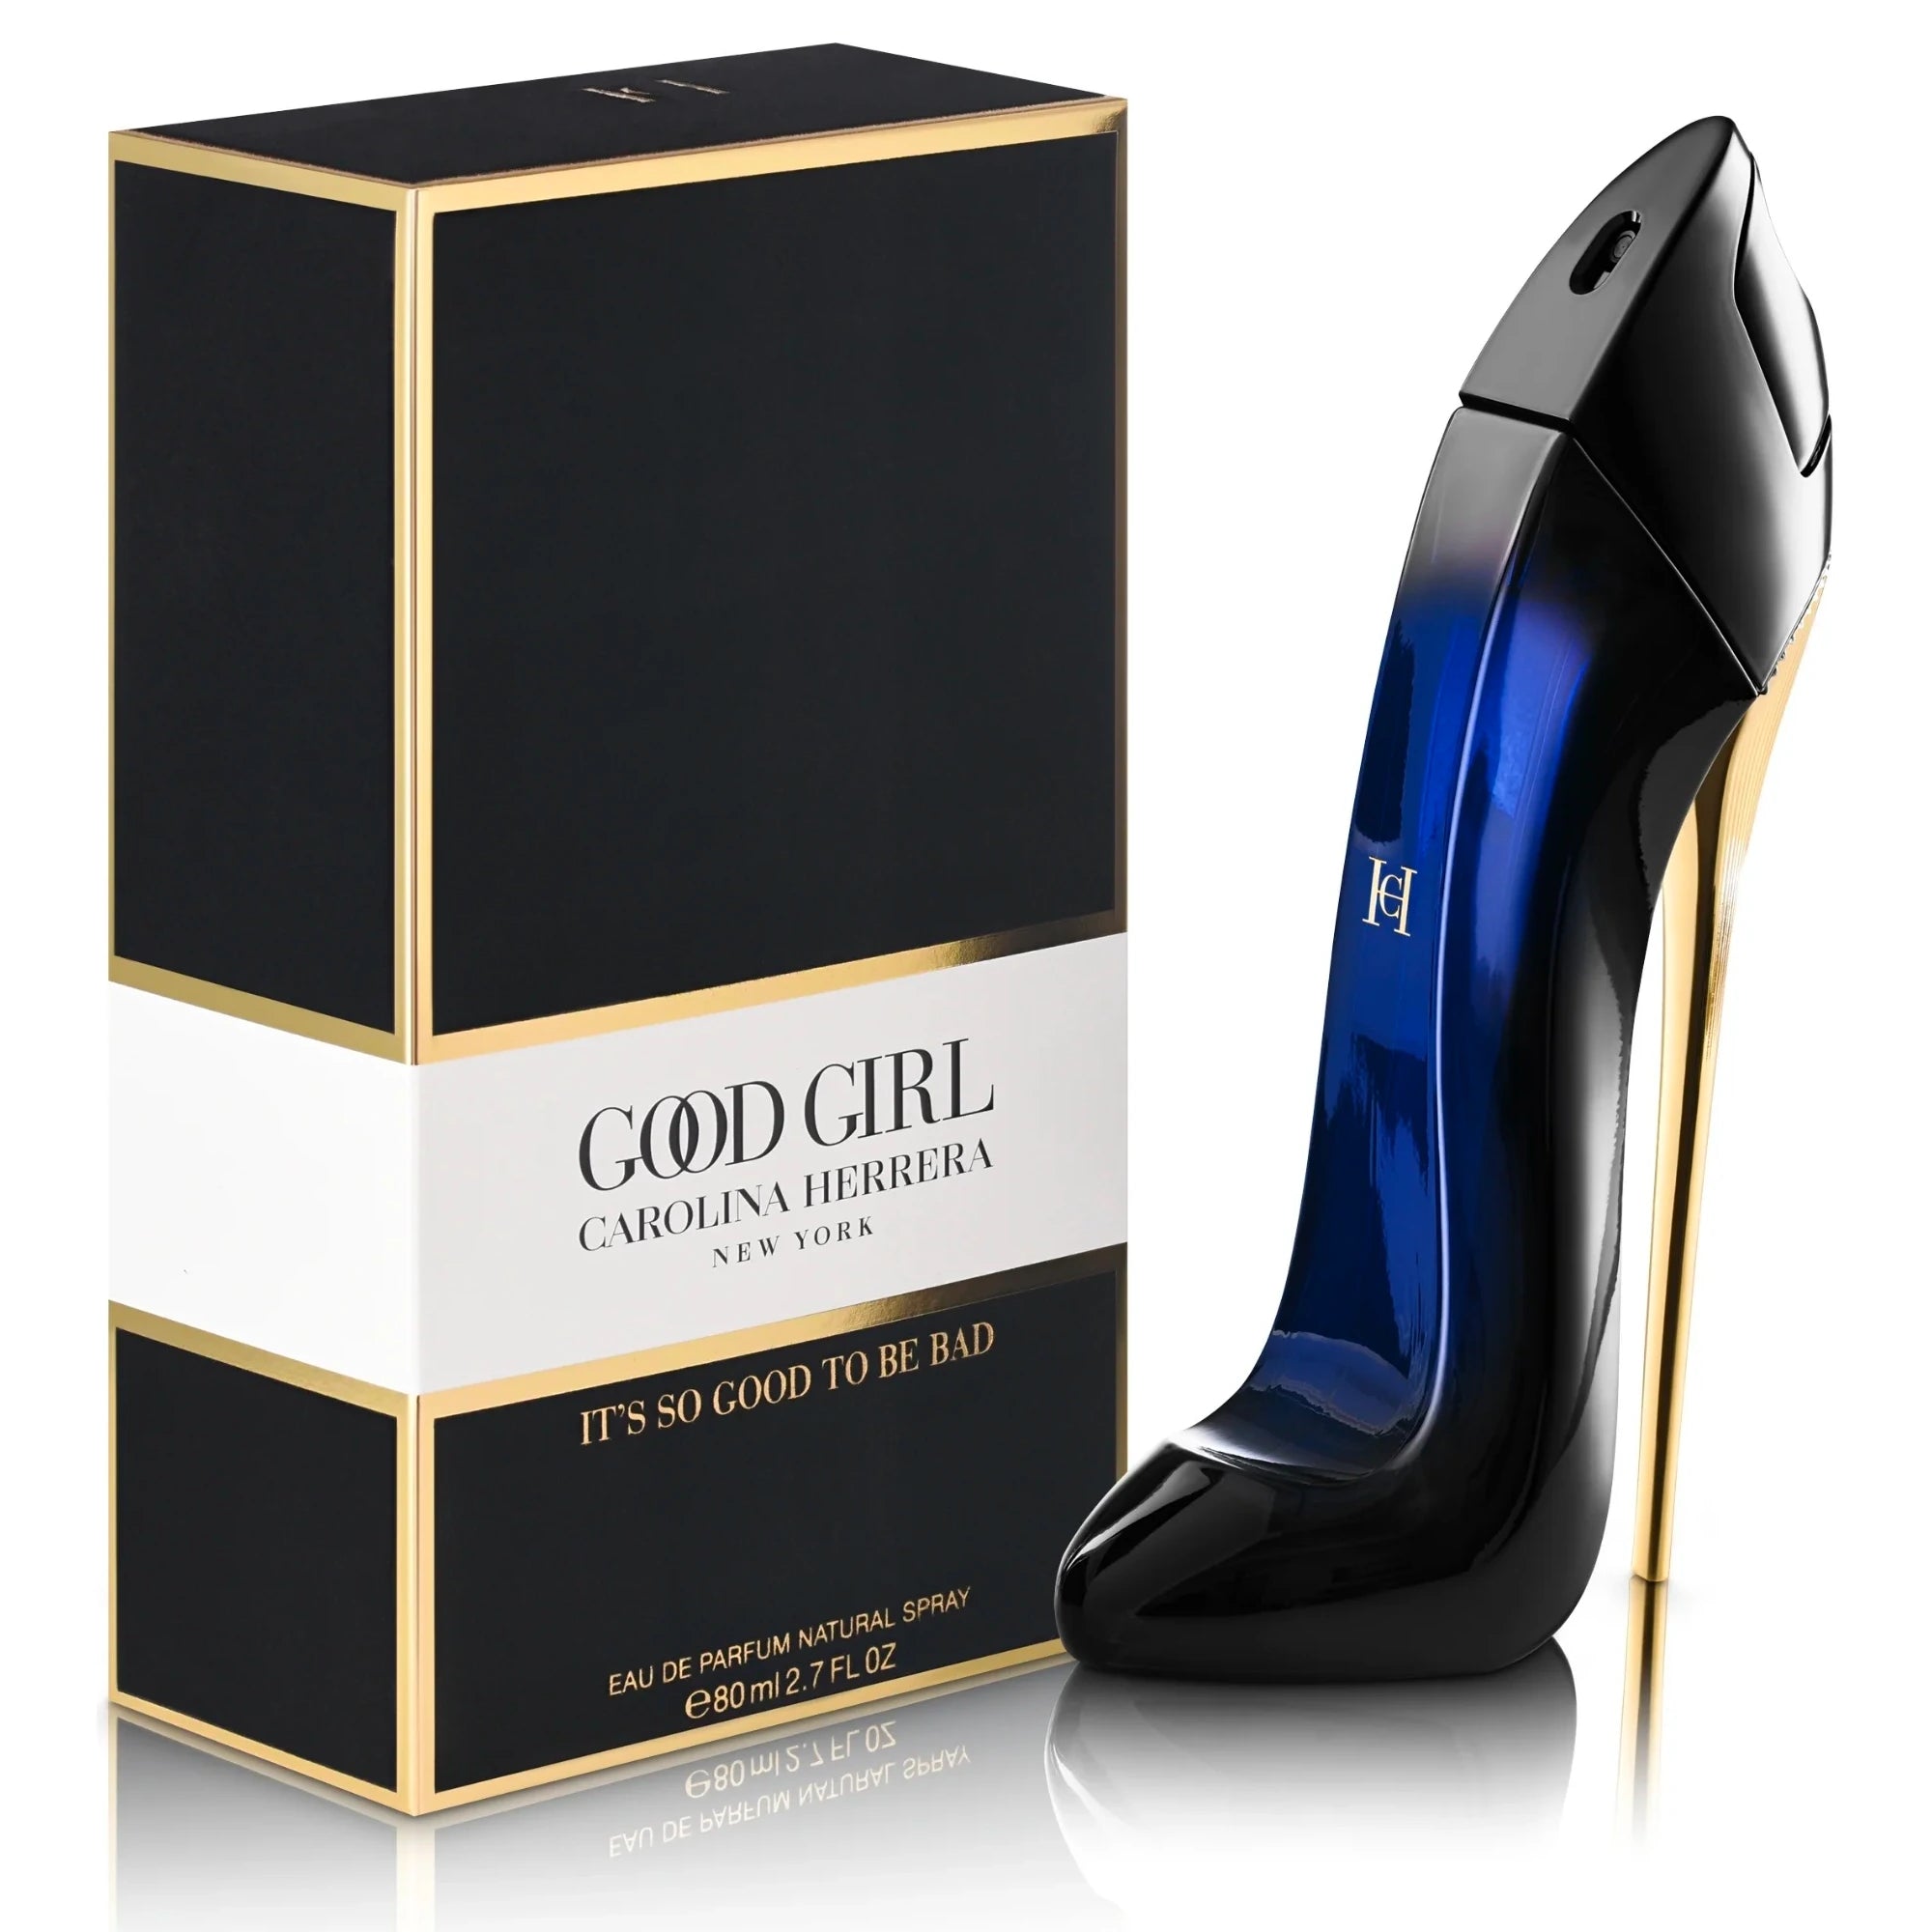 <p>Carolina Herrera released the new women's fragrance in September 2016. The new, sexy oriental fragrance is ironically named Good Girl with the message "It's so good to be bad!" (#goodtobebad).<br><br>Good Girl promises an innovative and addictive combination of tuberose and roasted tonka bean, which represents the duality of a woman‰۪s character. A floral wave of white Sambac jasmine and tuberose is placed in contrast with the mysterious and deep notes of tonka bean and cocoa.</p>
<p>"In life there should be a little mystery" and Seduce the senses, femininity takes a power walk. The face of the perfume is model Karlie Kloss.</p>